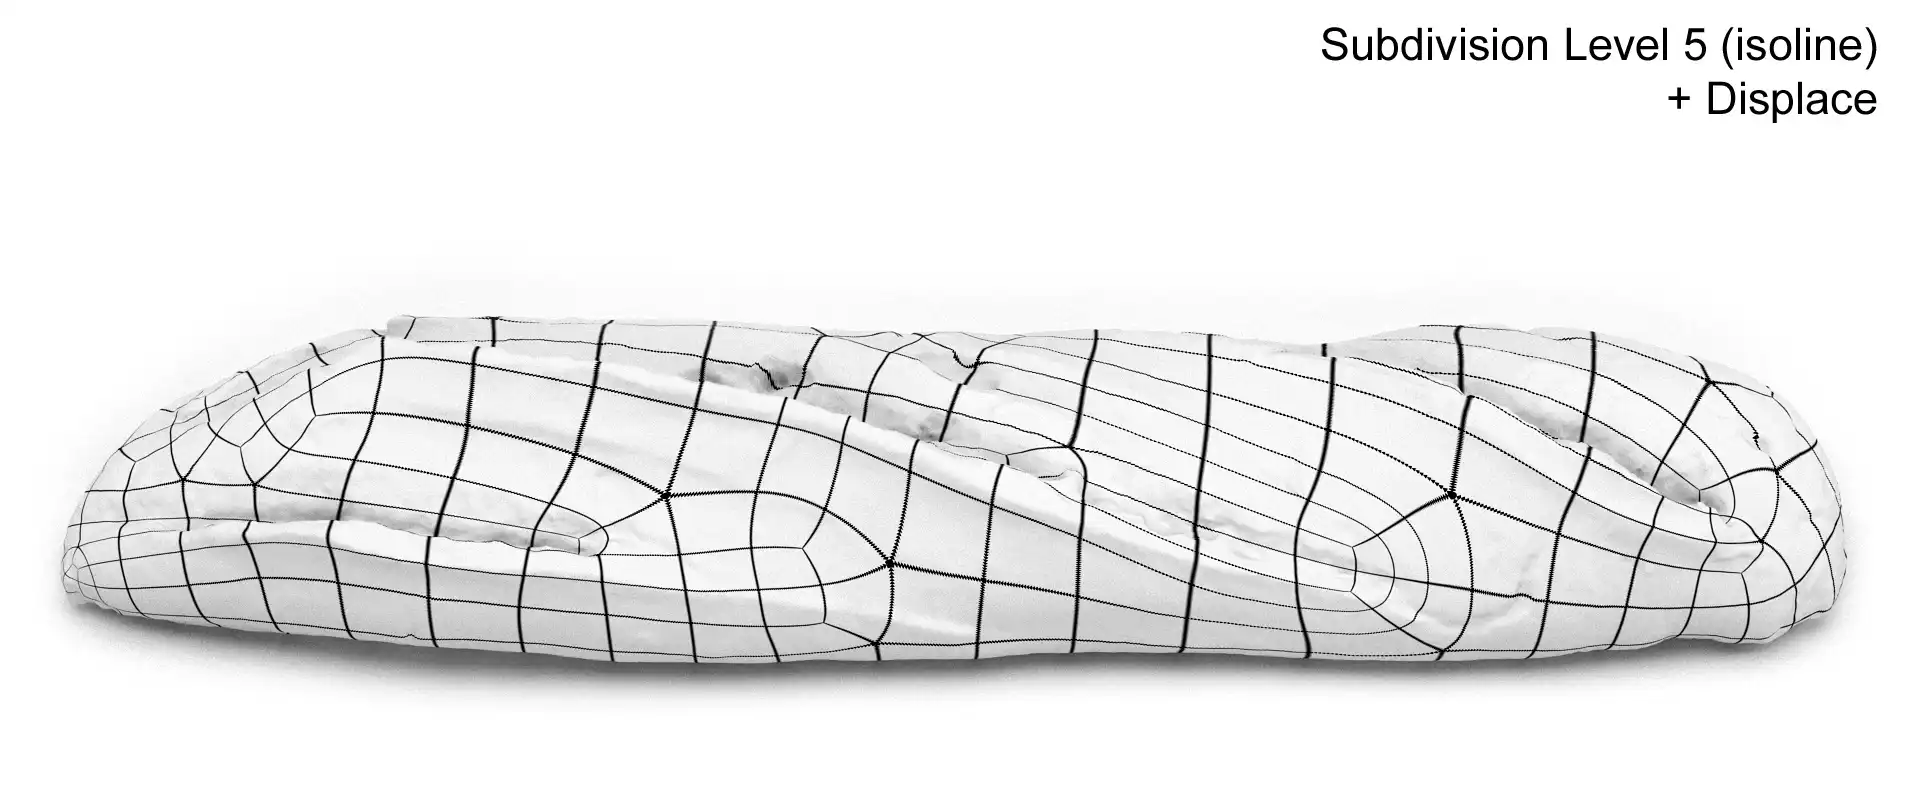 wireframe render of baguette 3d model with subdivision level of five and displacement modifier applied